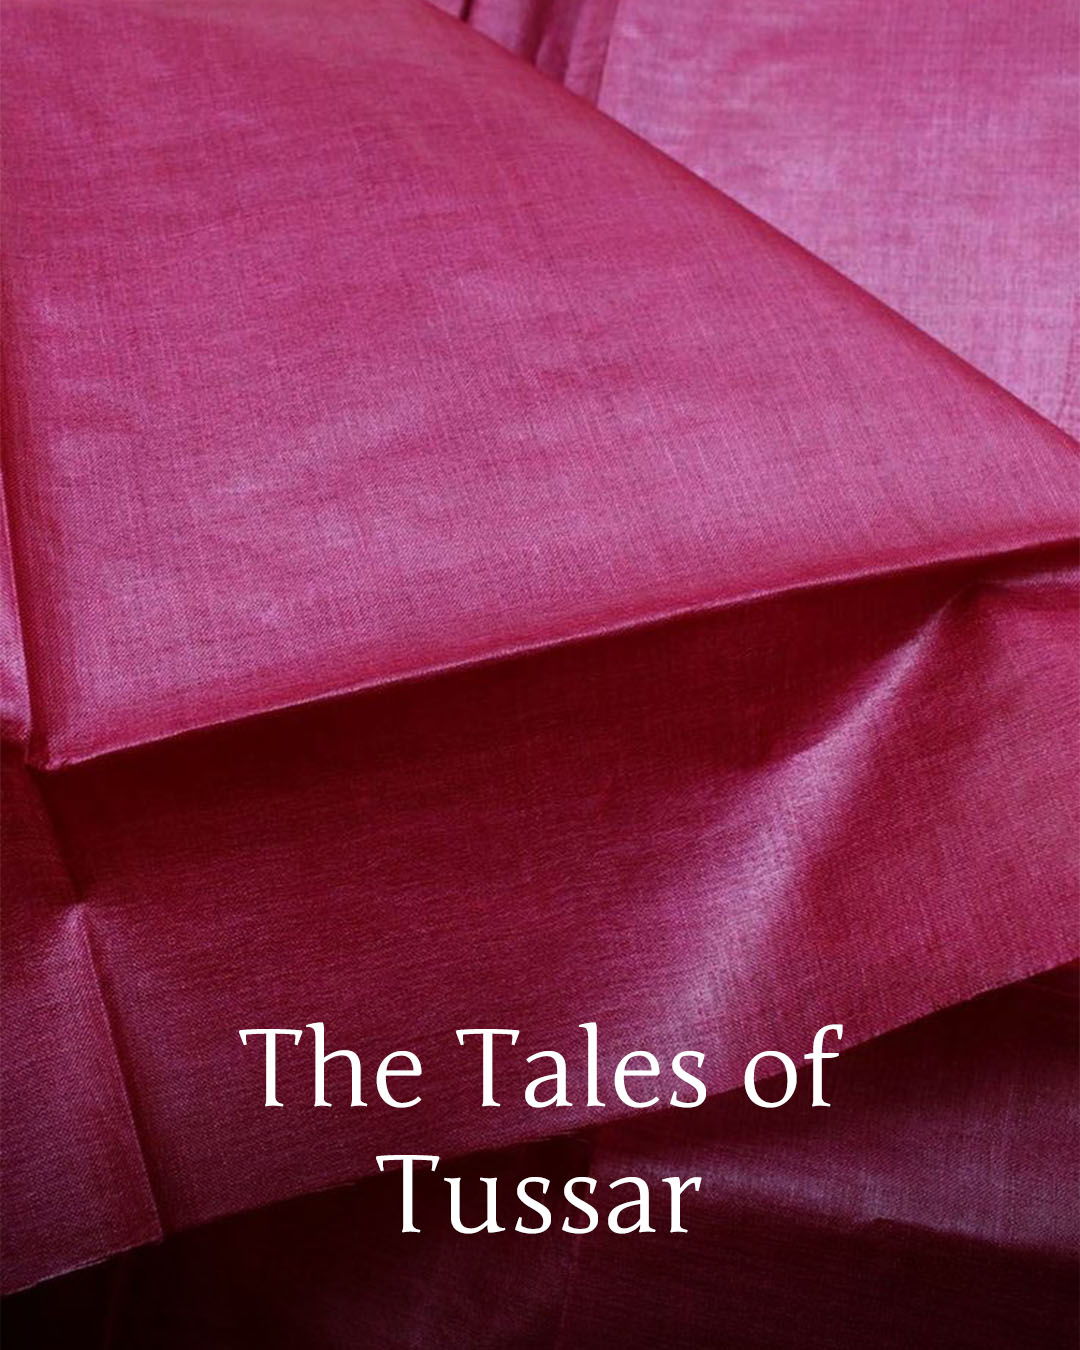 The tales of tussar